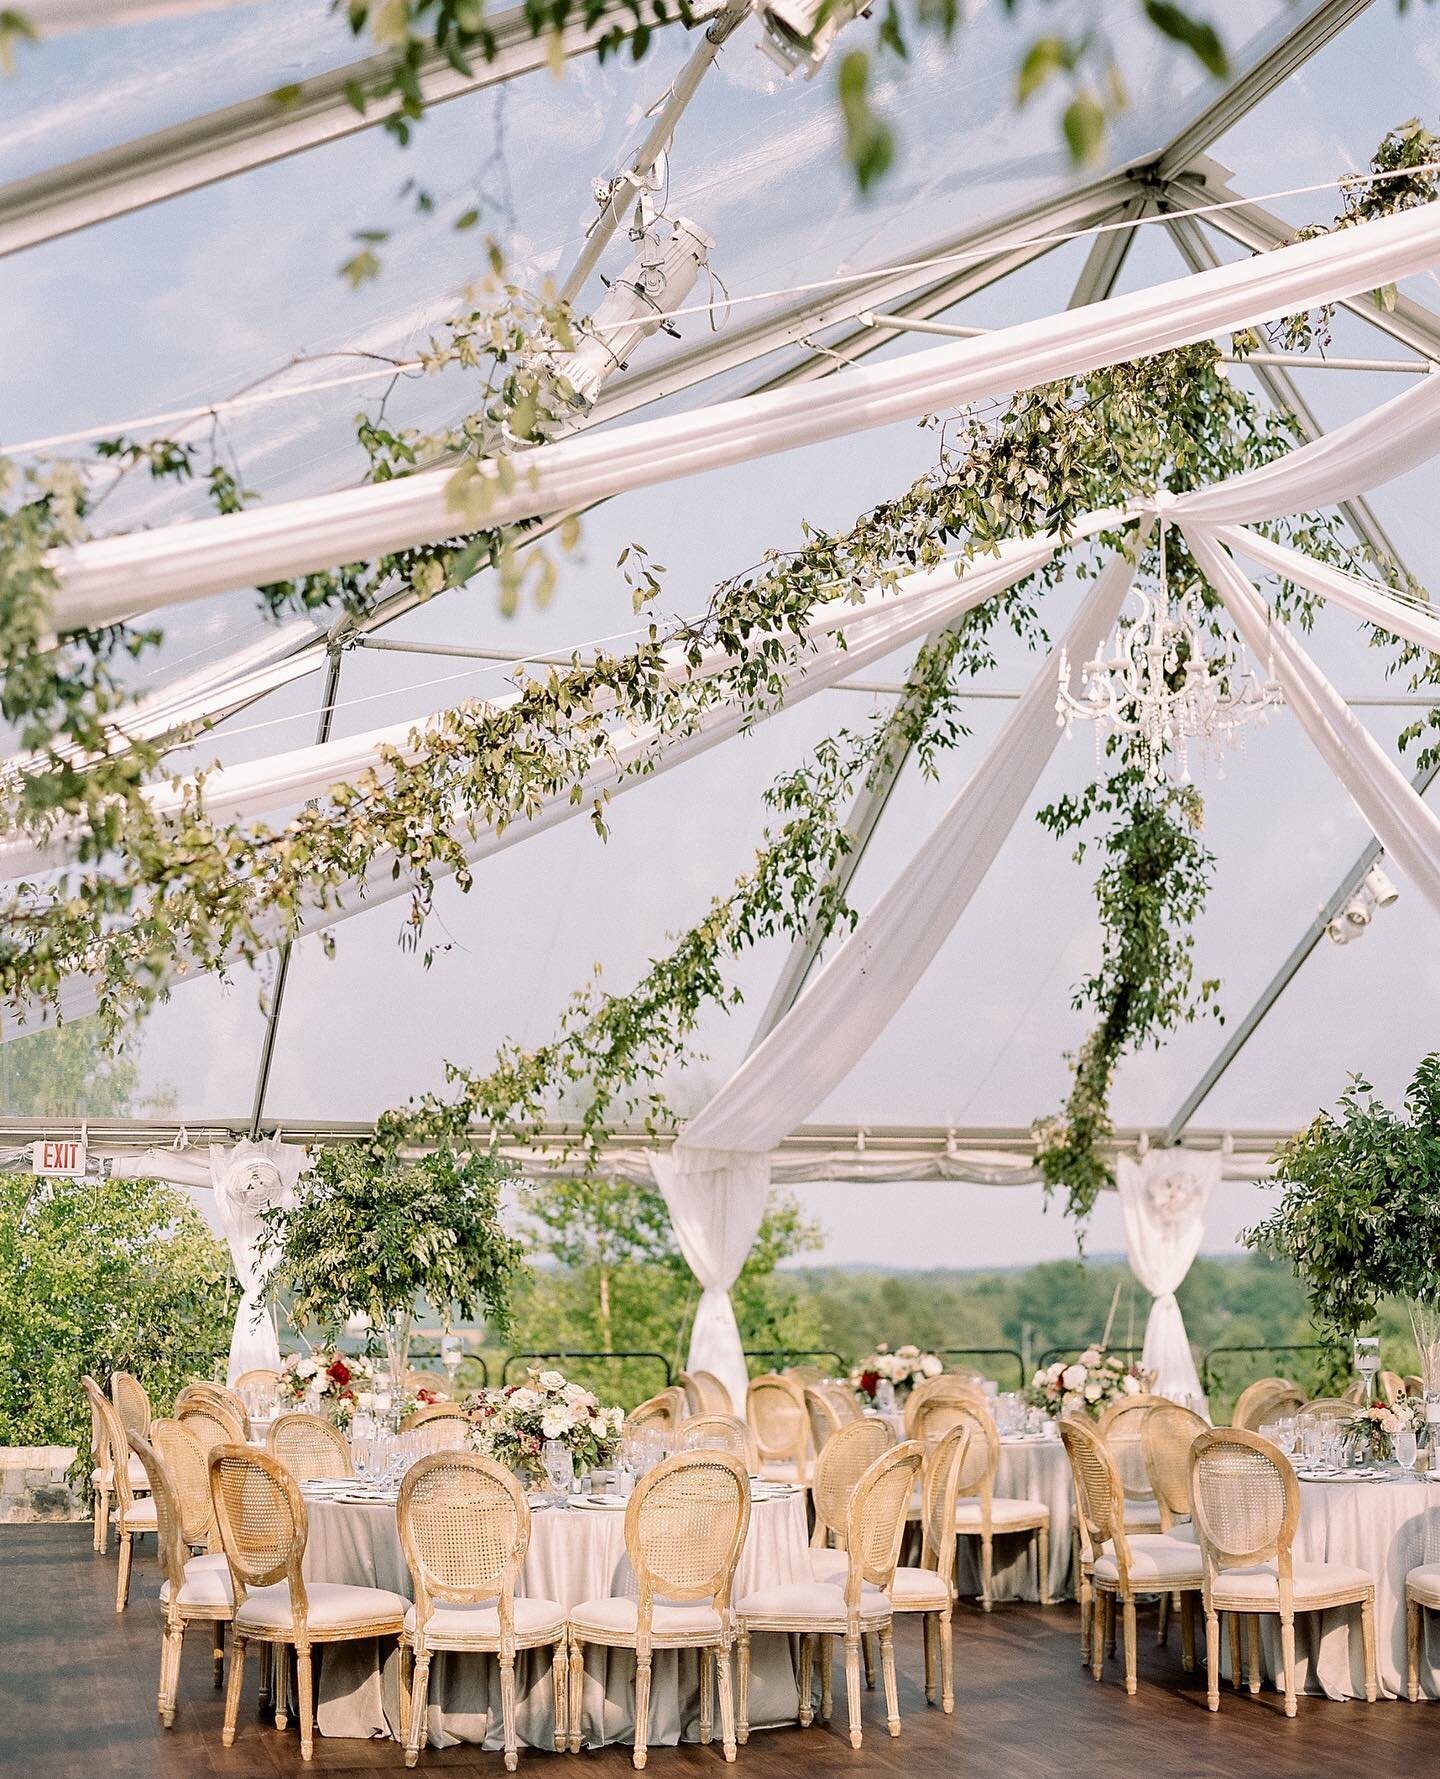 This combination of a clear top tent, white fabric swag, draped greenery and chandeliers will forever be a favorite- it&rsquo;s just timeless! 

Planning + Design @Idaroseevents  Venue, Catering and Cake: @salamanderresort  Photographer: @reneehphoto